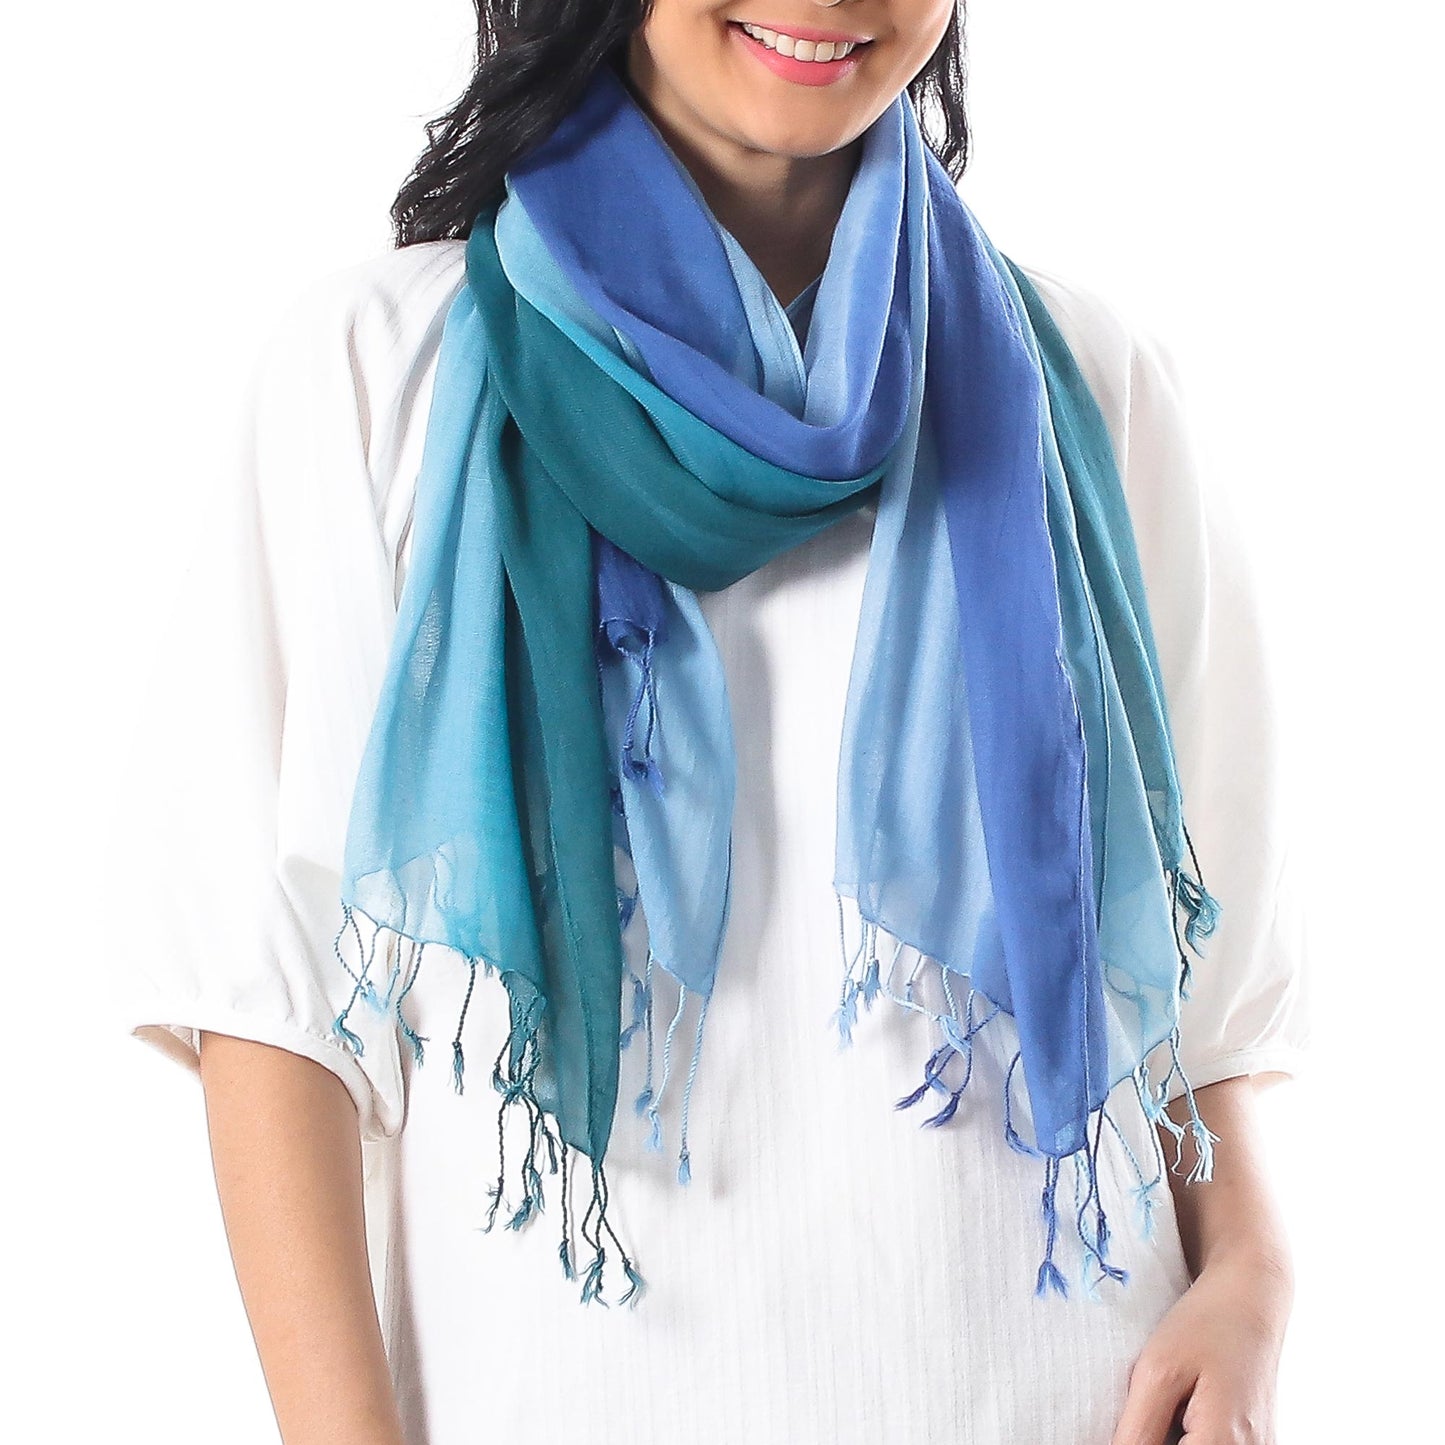 Delightful Breeze in Blue Cotton Wrap Scarves in Blue from Thailand (Pair)